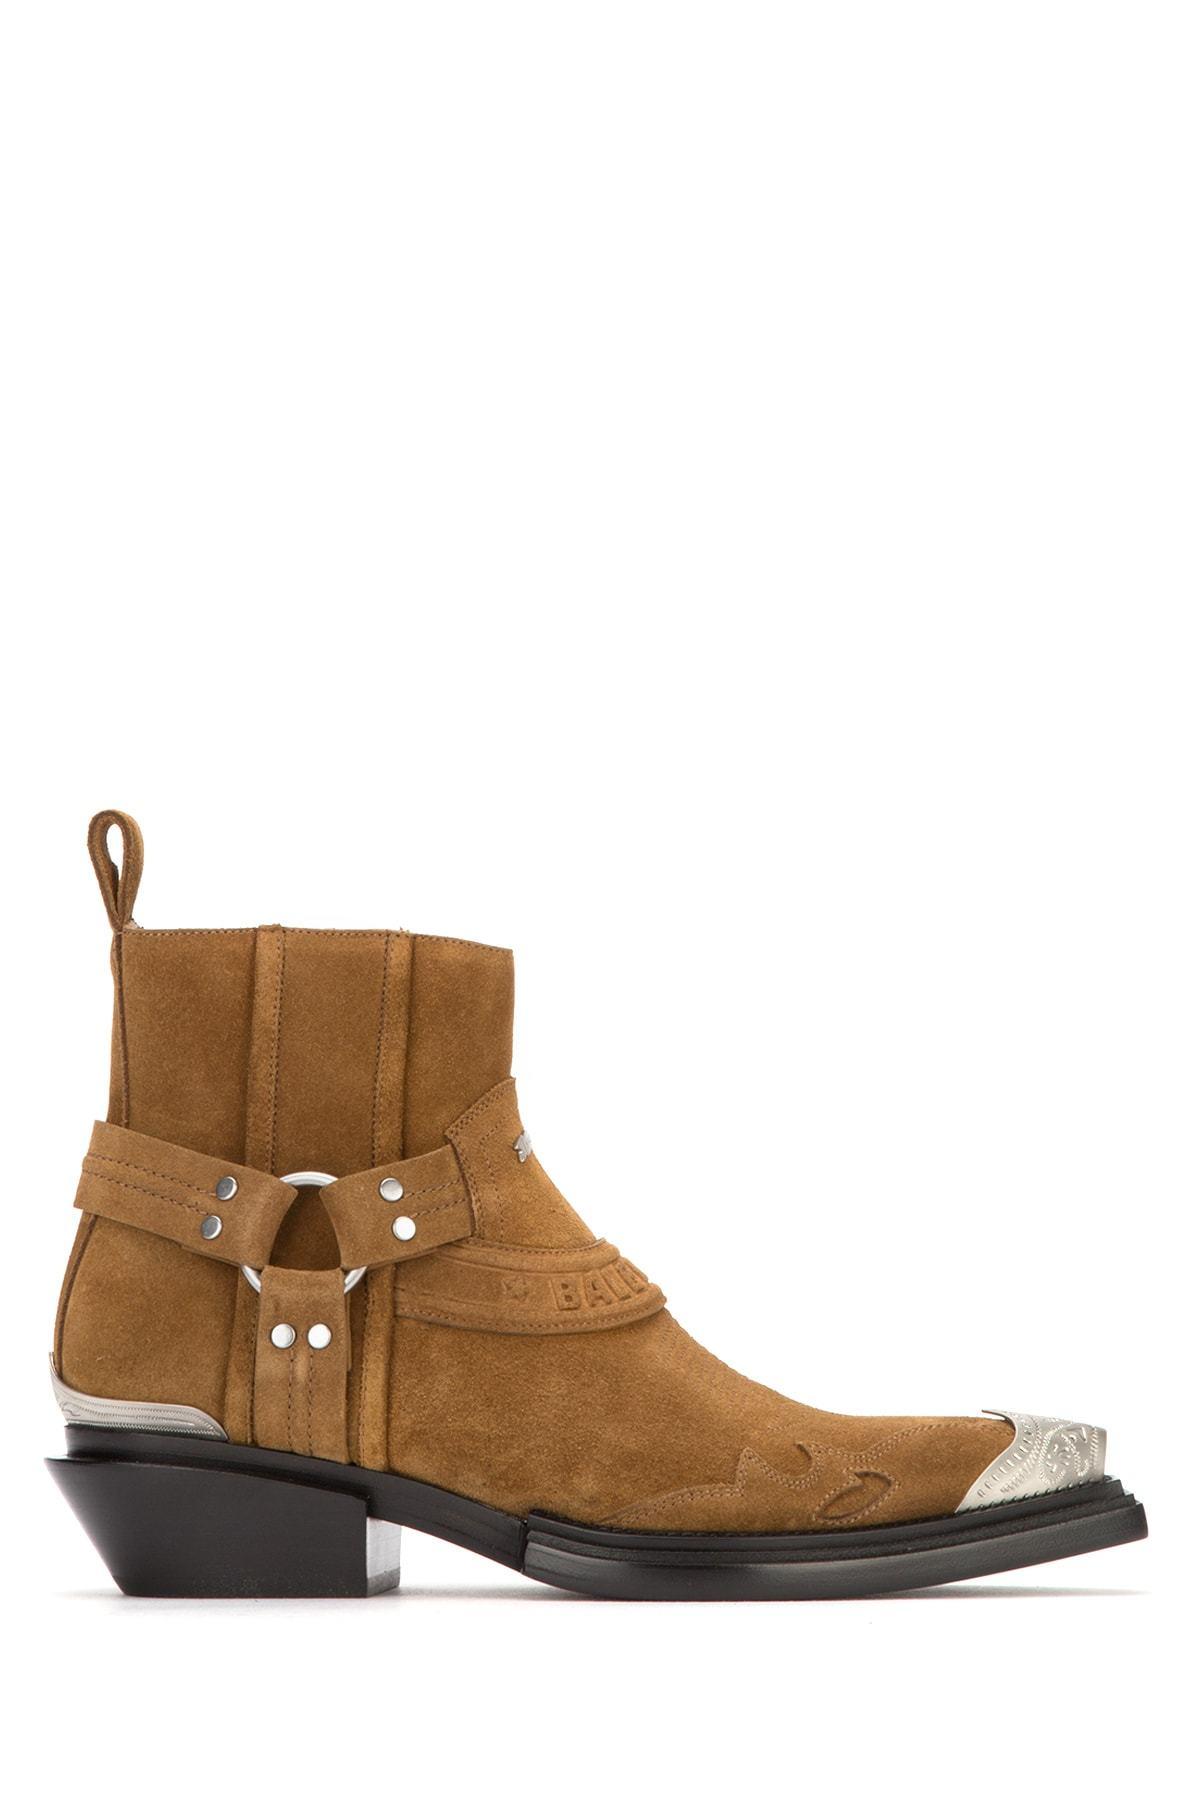 Balenciaga Santiag Harness Suede Ankle Boots in Brown | Lyst